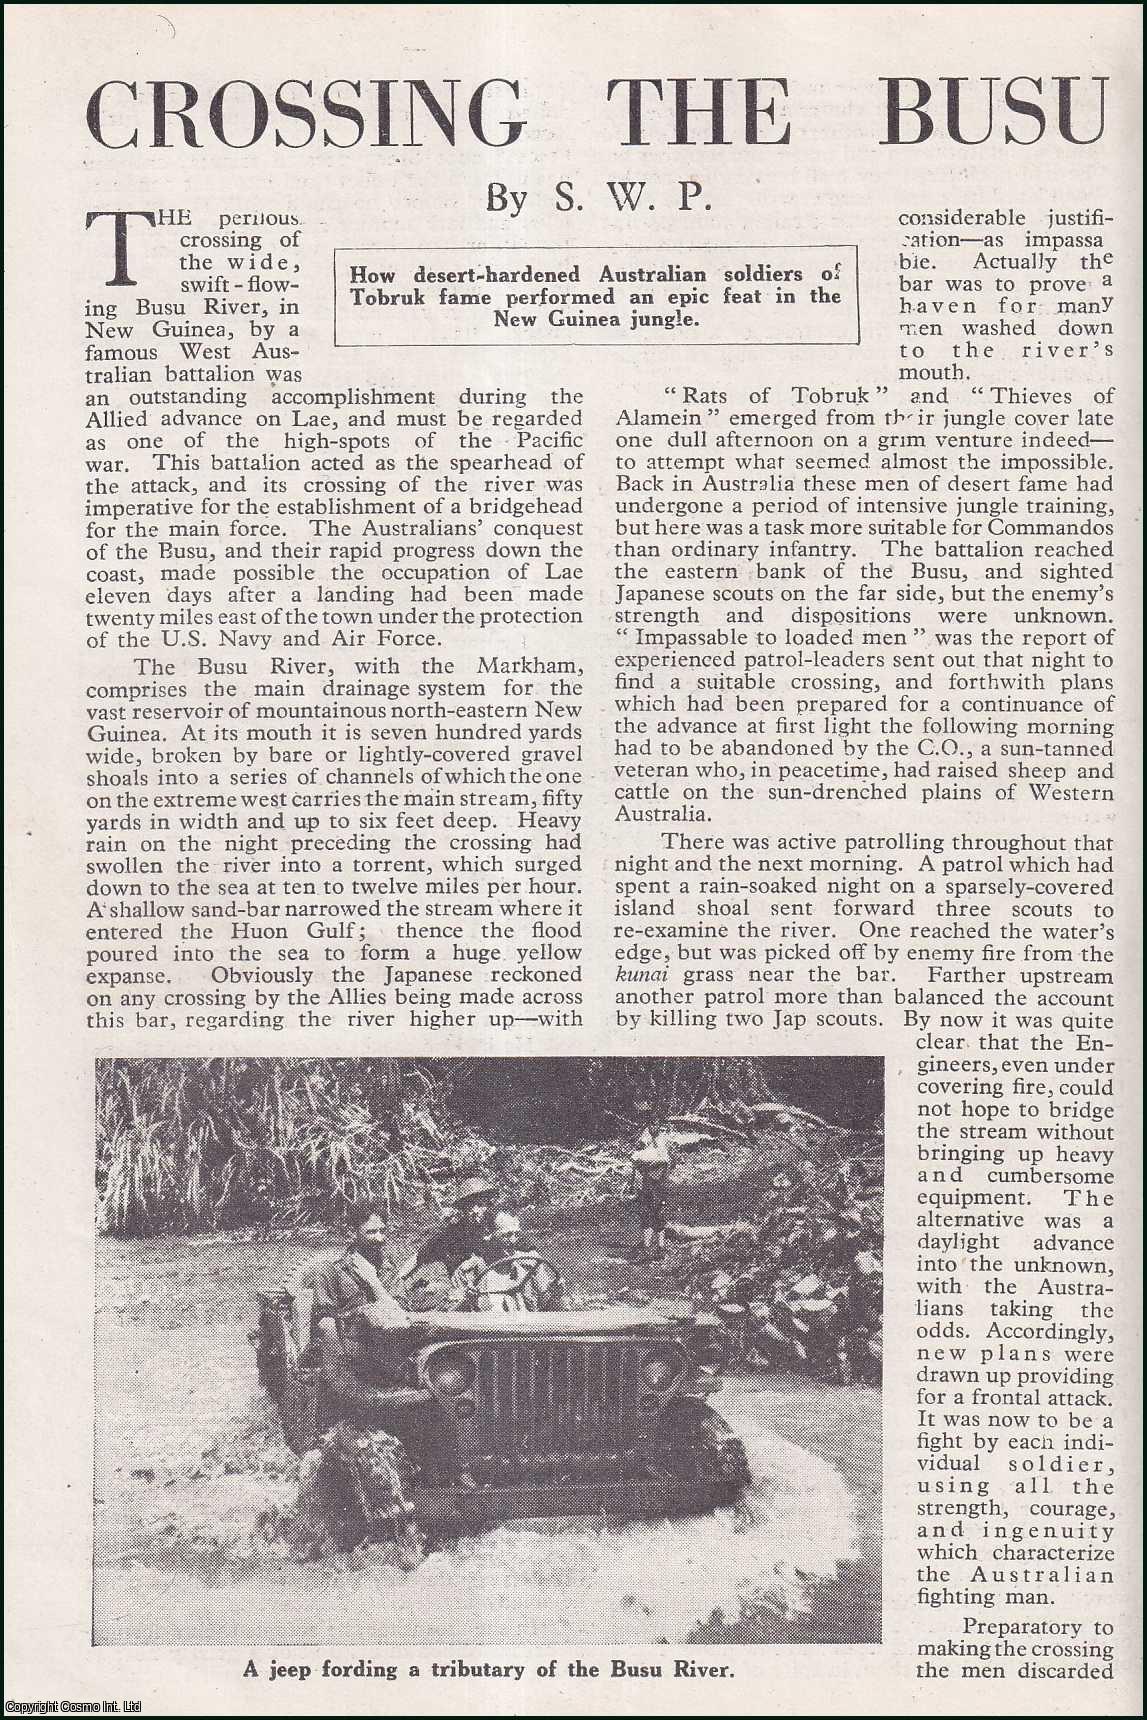 S.W.P. - Crossing the Busu : Australian Soldiers of Tobruk in the New Guinea Jungle. An uncommon original article from the Wide World Magazine, 1945.